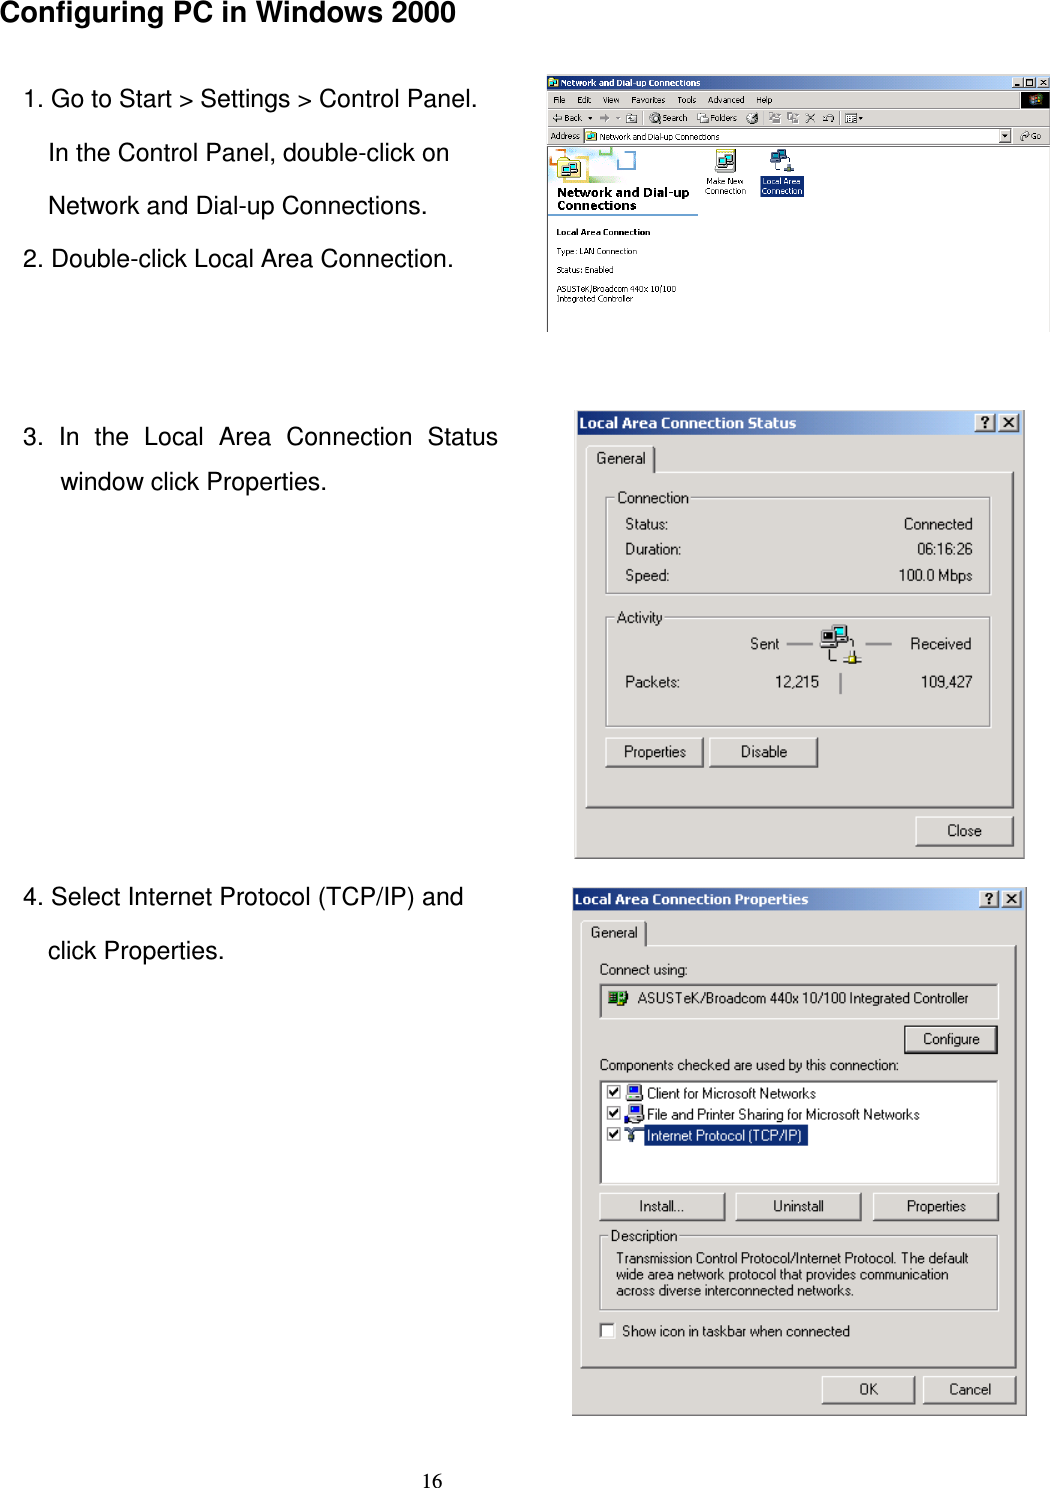   16Configuring PC in Windows 2000  1. Go to Start &gt; Settings &gt; Control Panel. In the Control Panel, double-click on   Network and Dial-up Connections. 2. Double-click Local Area Connection.  3.  In  the  Local  Area  Connection  Status window click Properties.  4. Select Internet Protocol (TCP/IP) and   click Properties.  